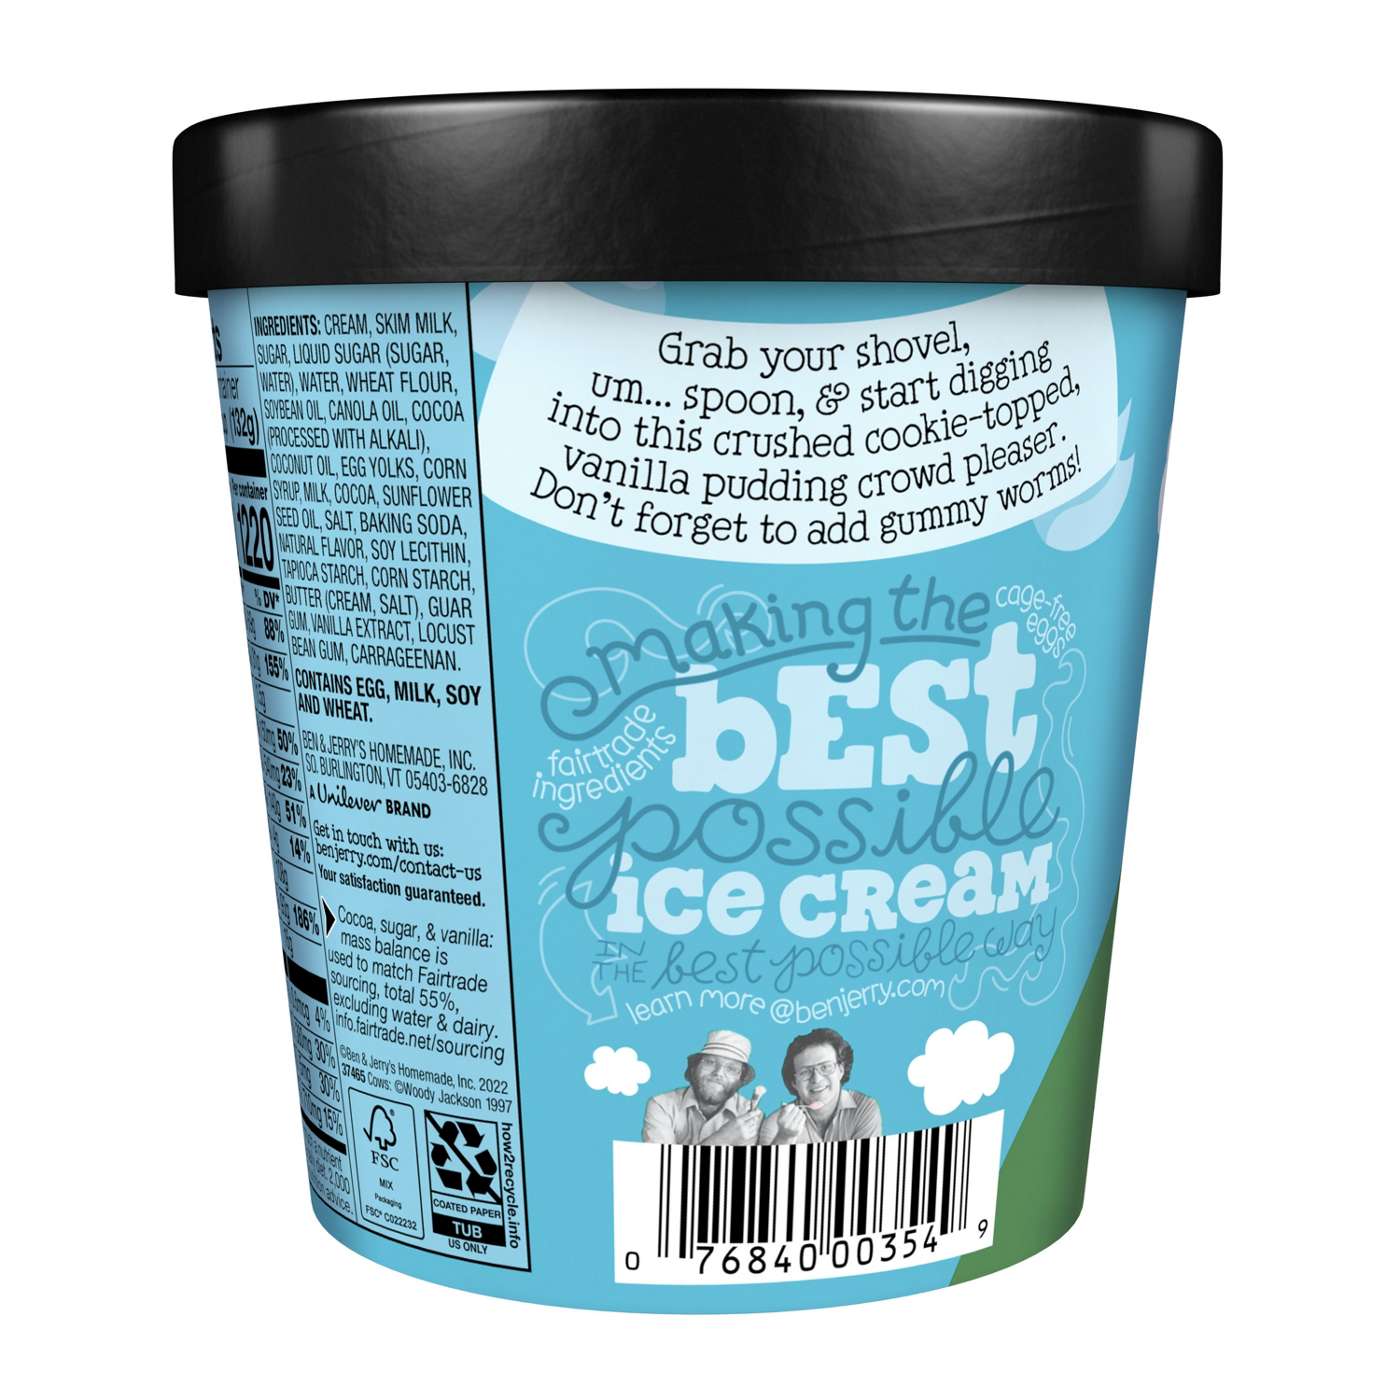 Ben & Jerry's Topped Dirt Cake Ice Cream; image 6 of 6